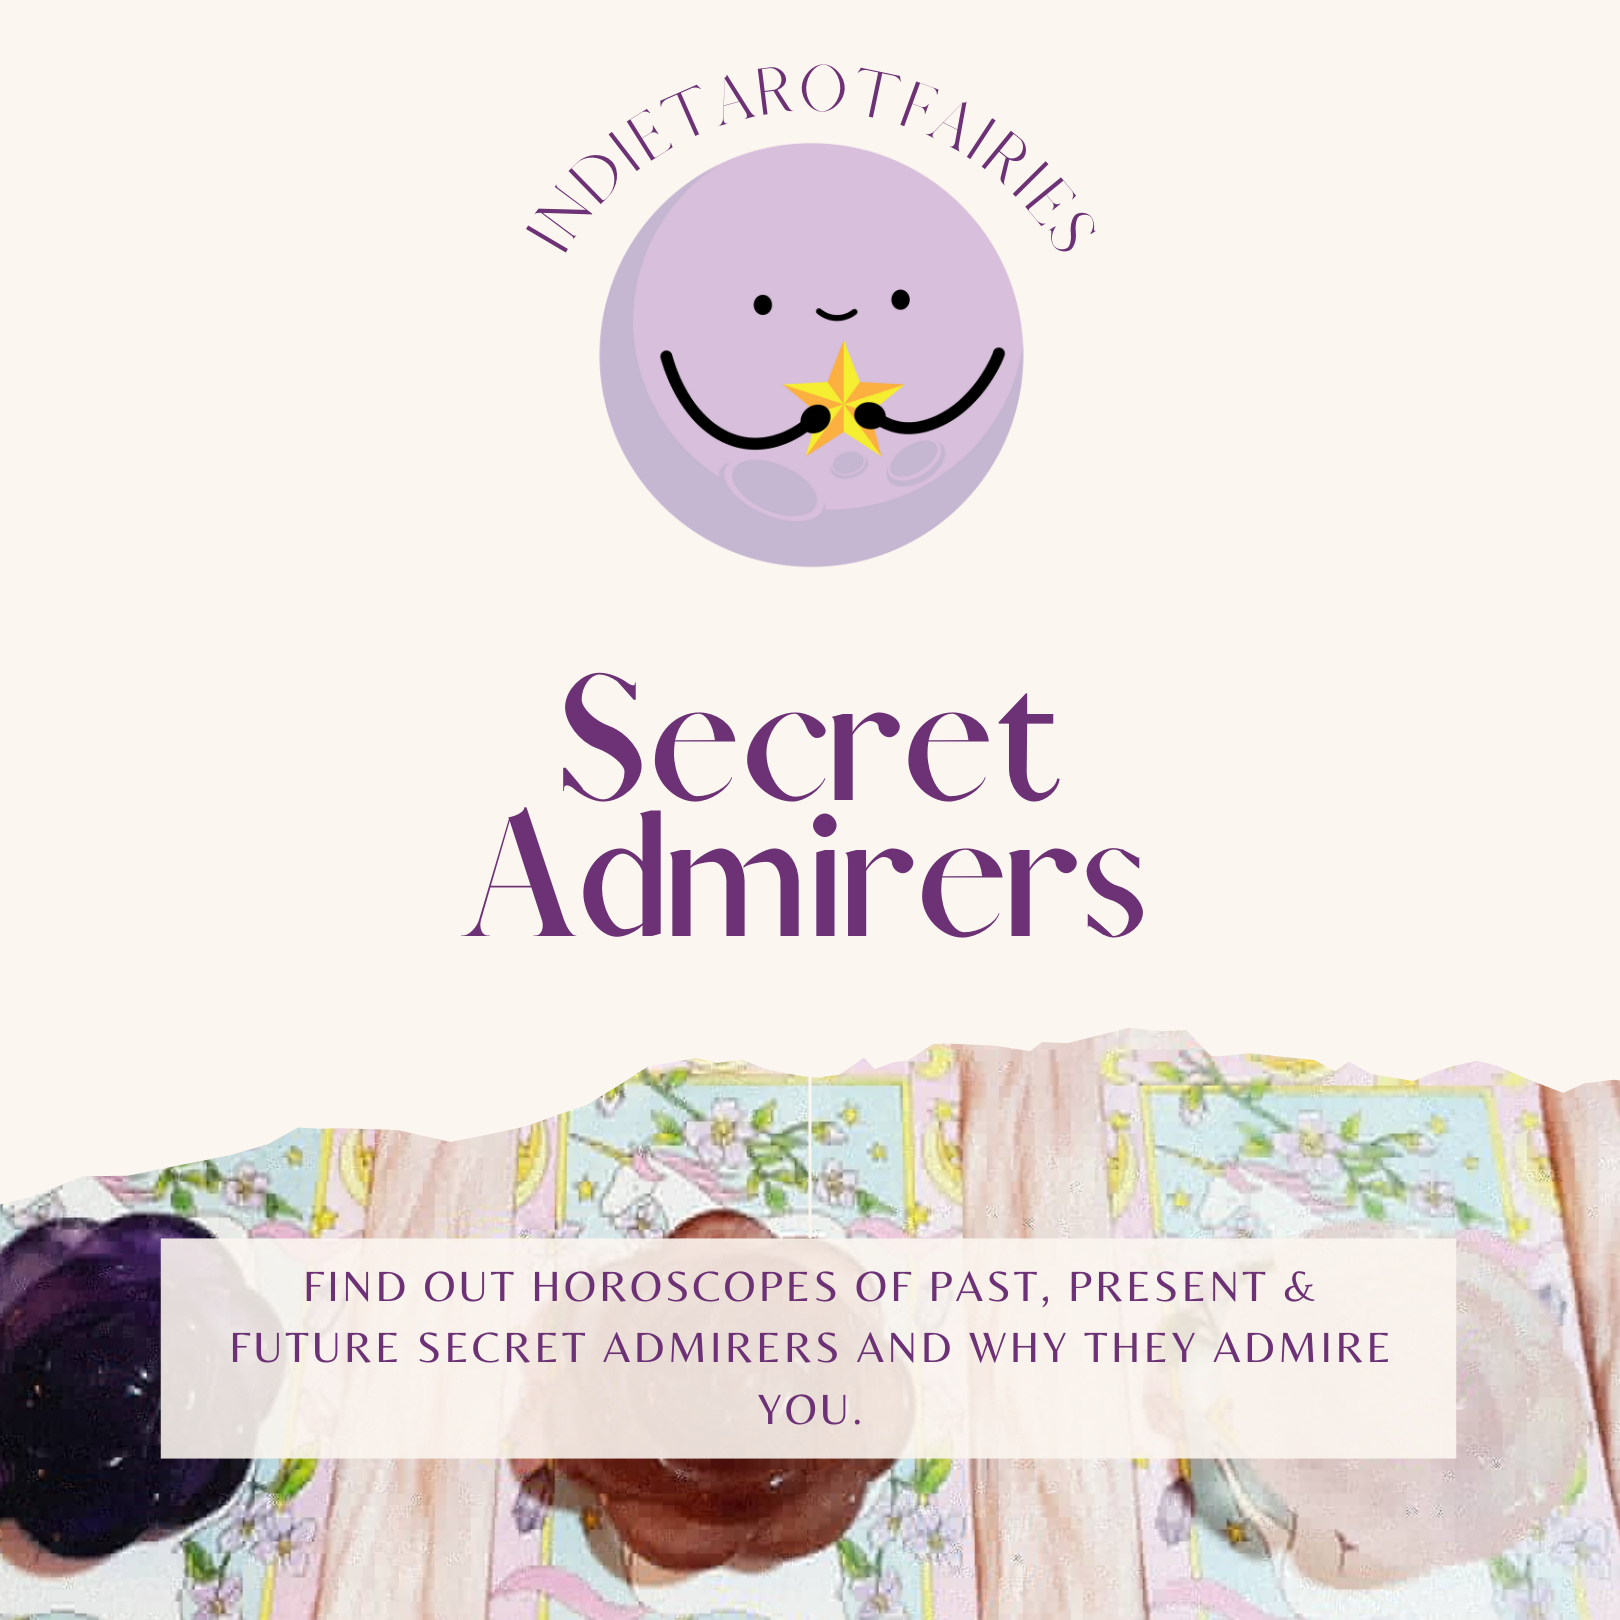 Secret Admirers (Who's got a crush on you? Past, Present & Future)